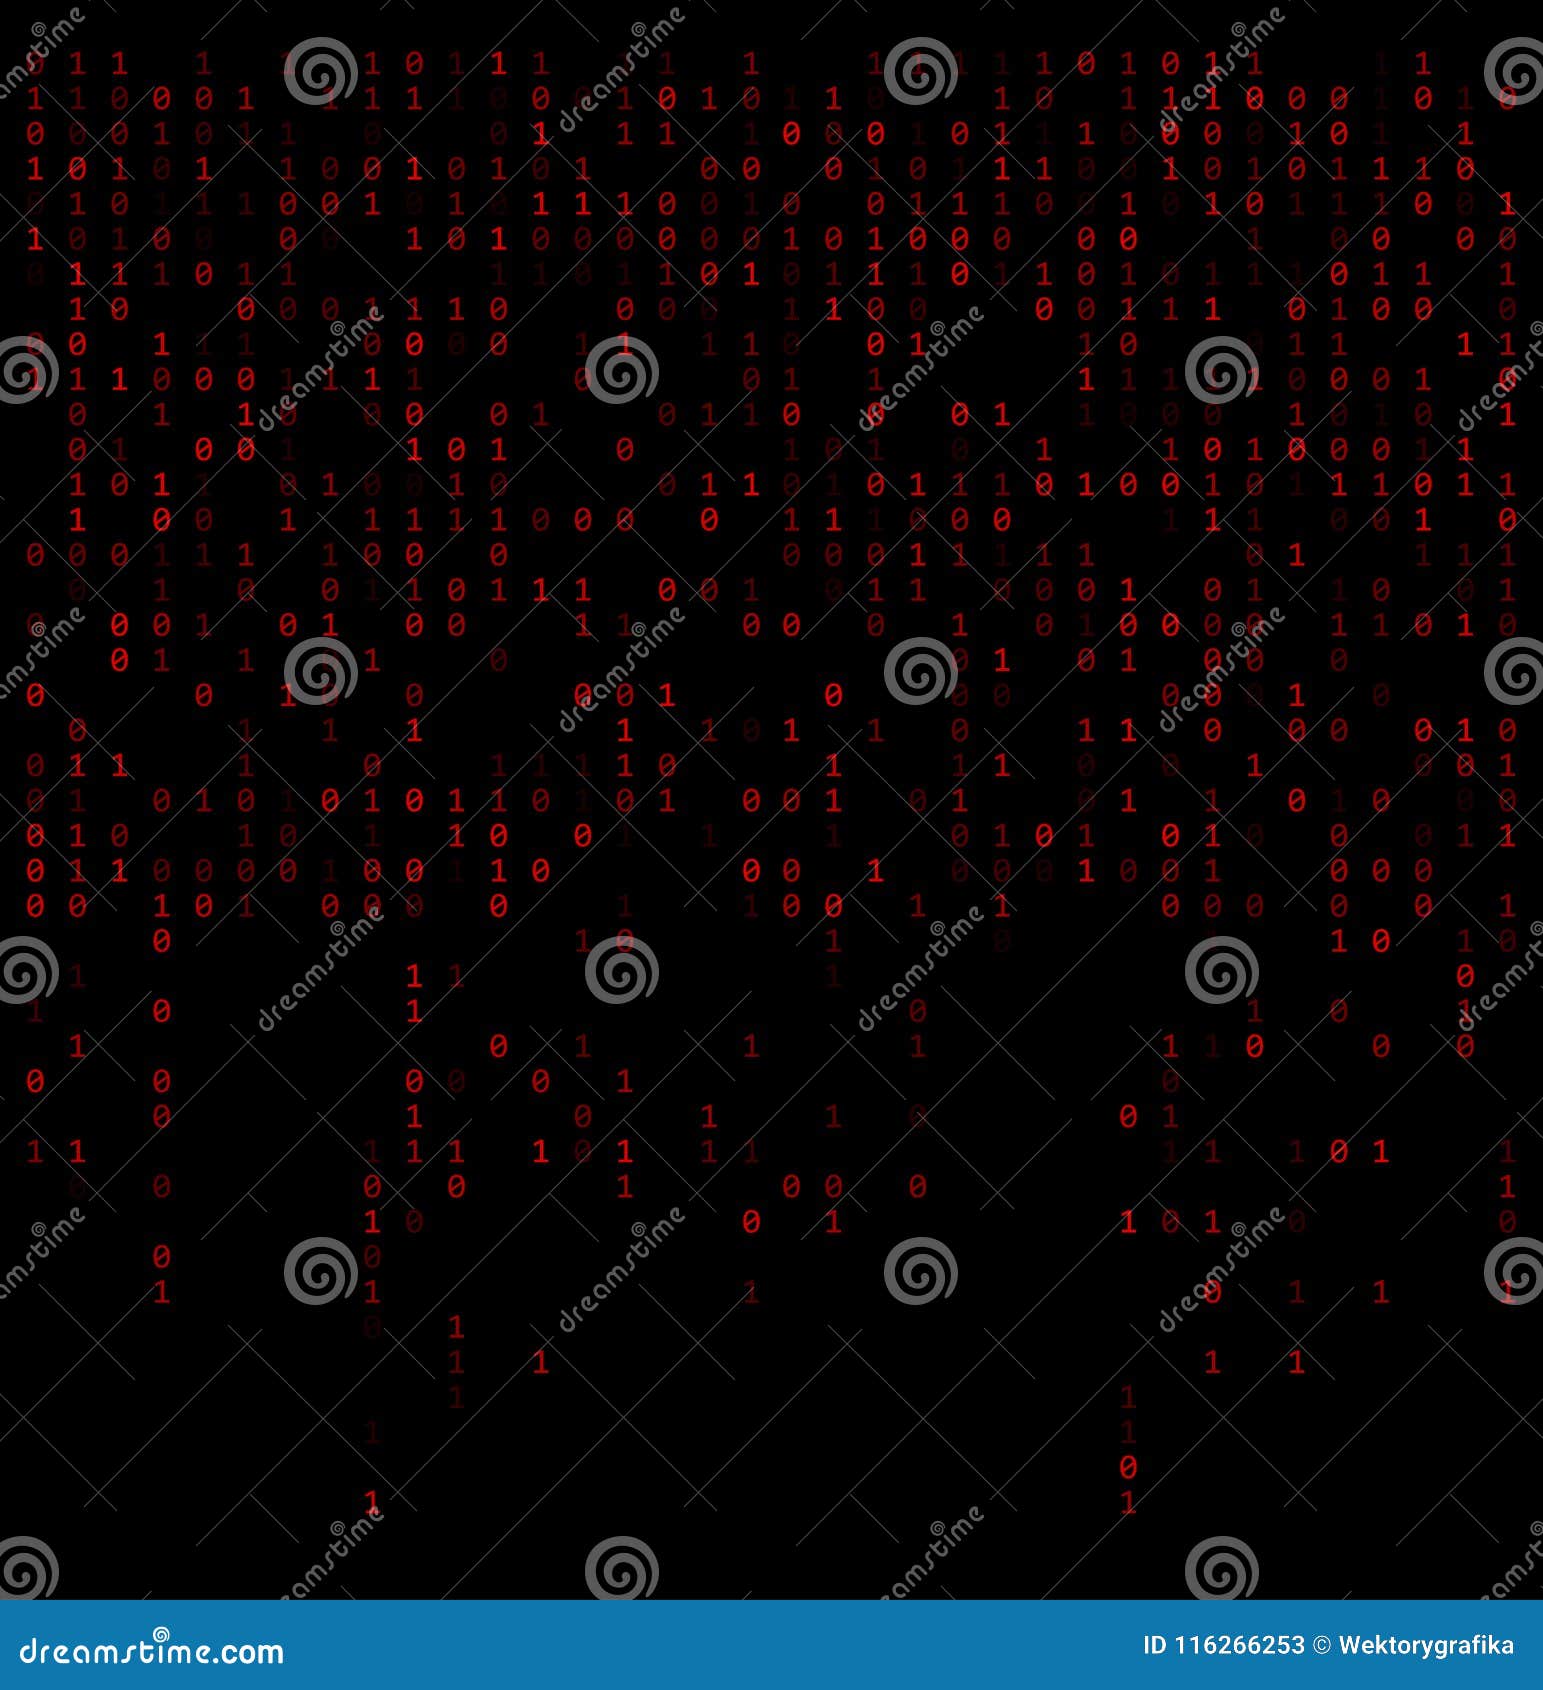 Binary Digits Falling Background Abstract 01 Wallpaper Stock